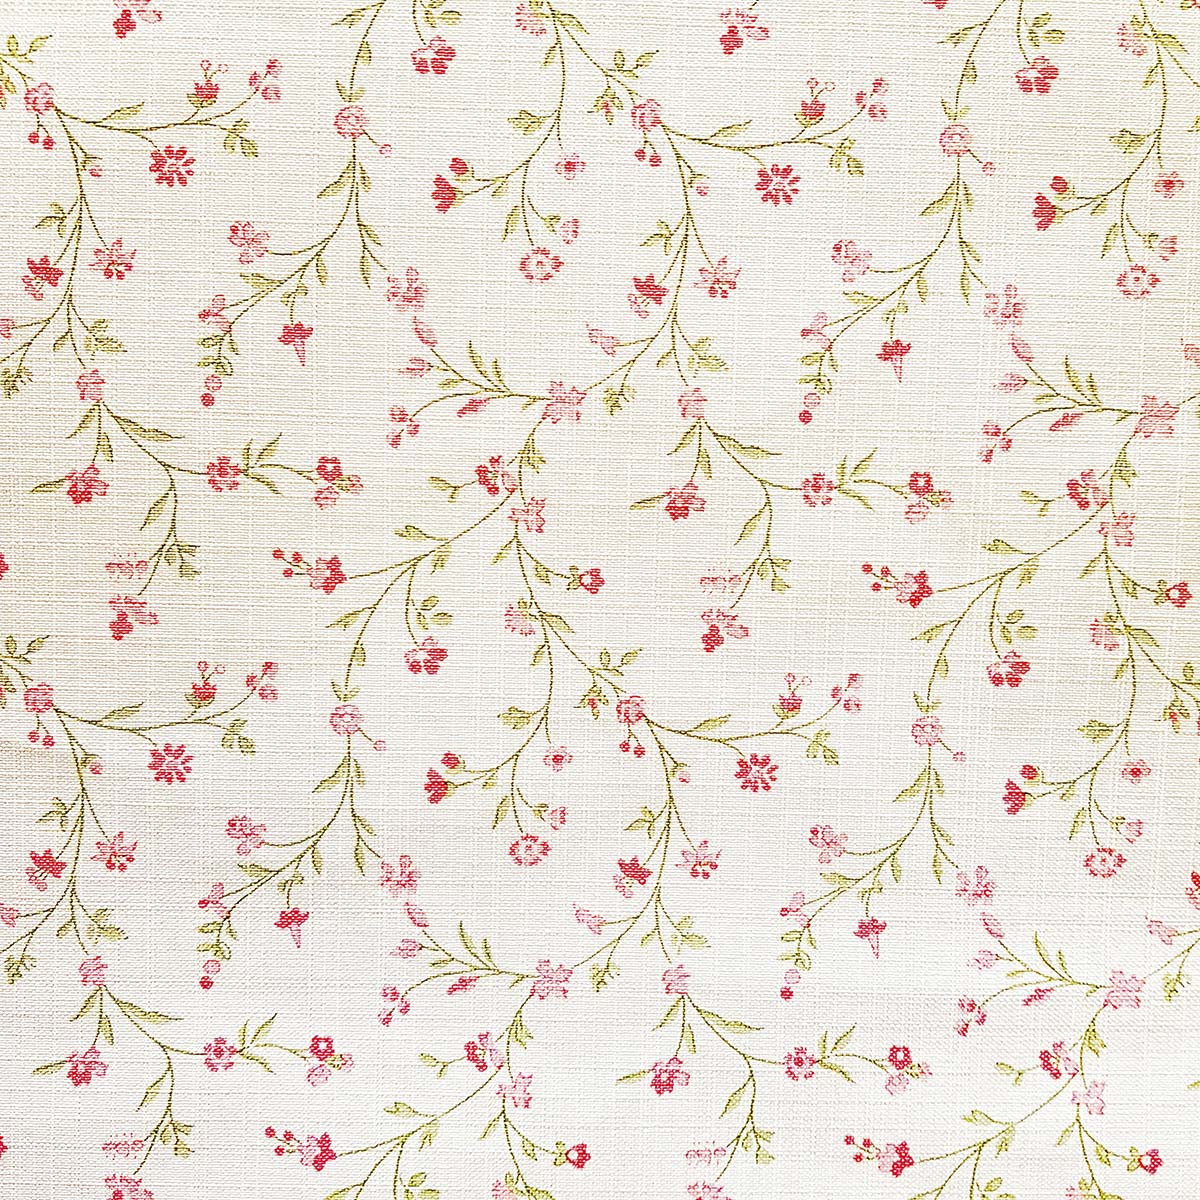 A fabric with small flowers